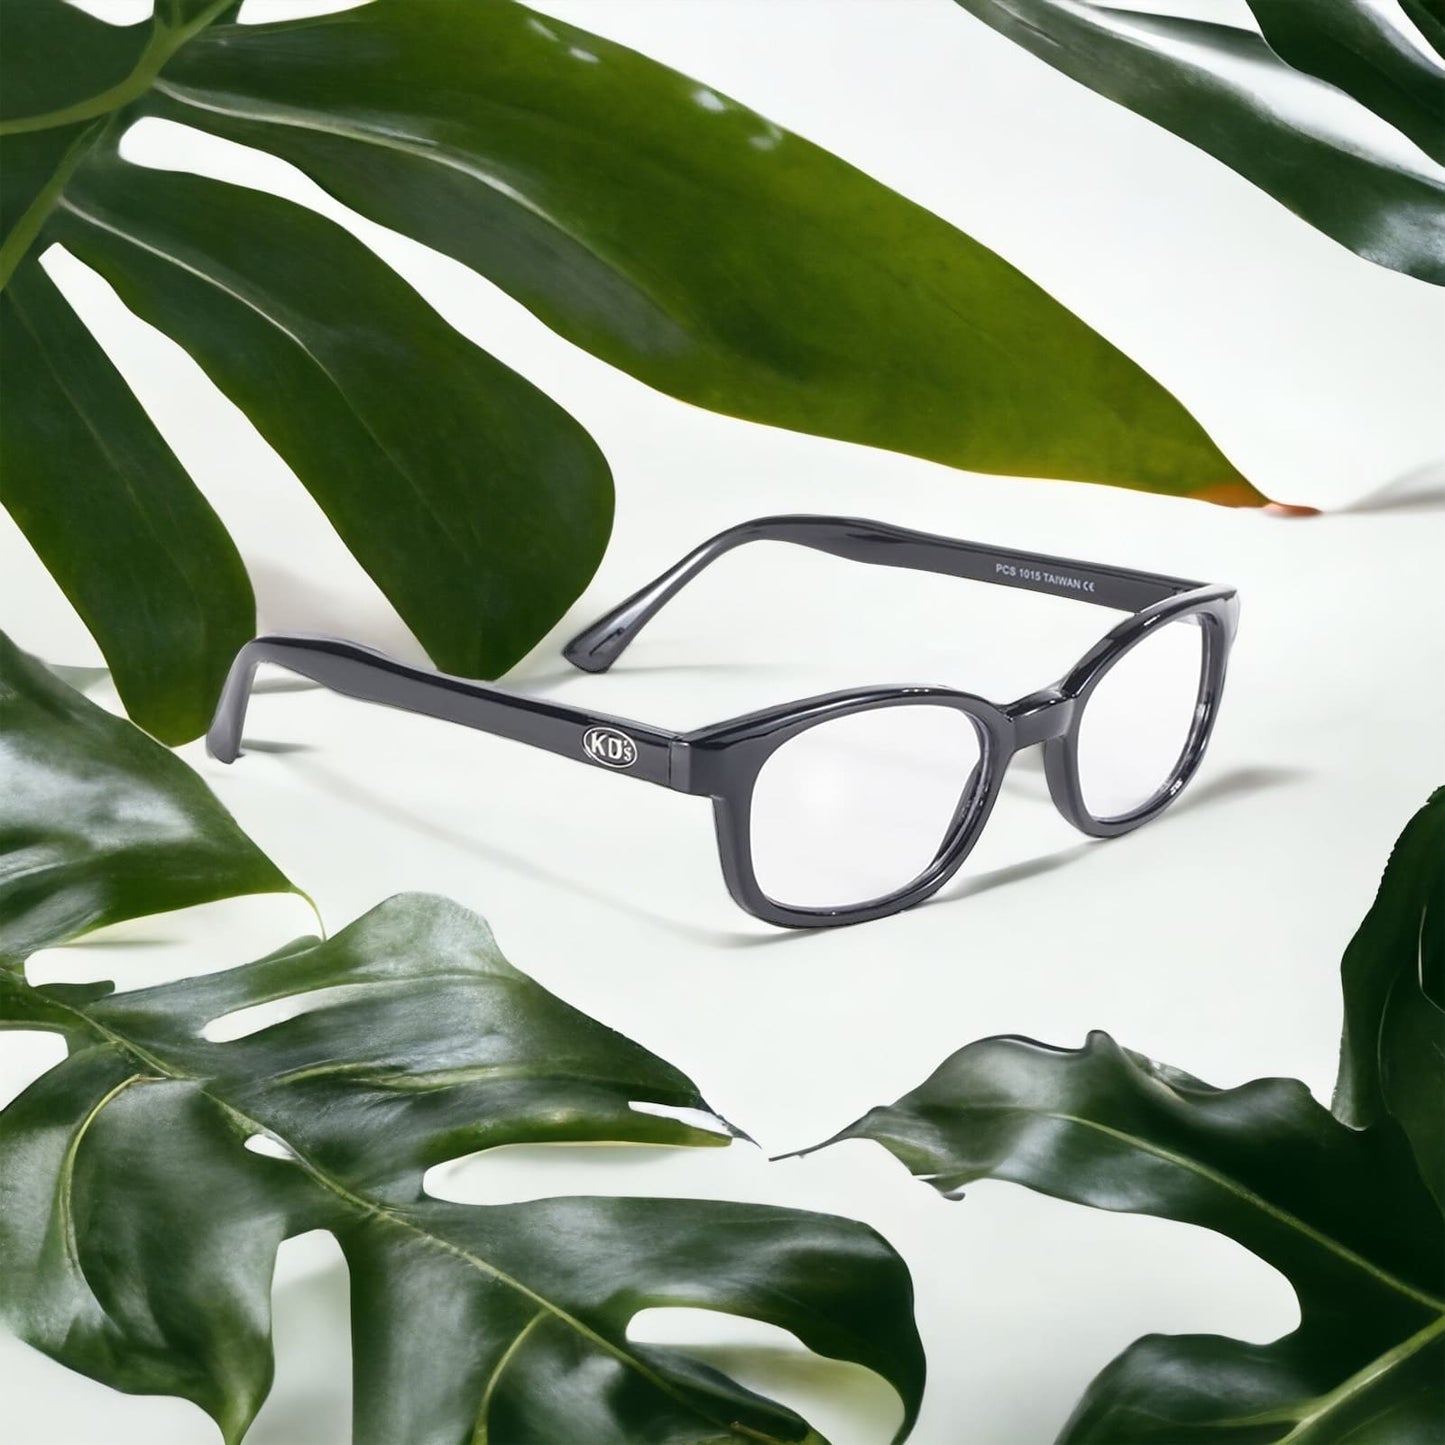 X-KD's 1015 sunglasses with transparent lenses and a sophisticated black frame placed on a white desk surrounded by leaves